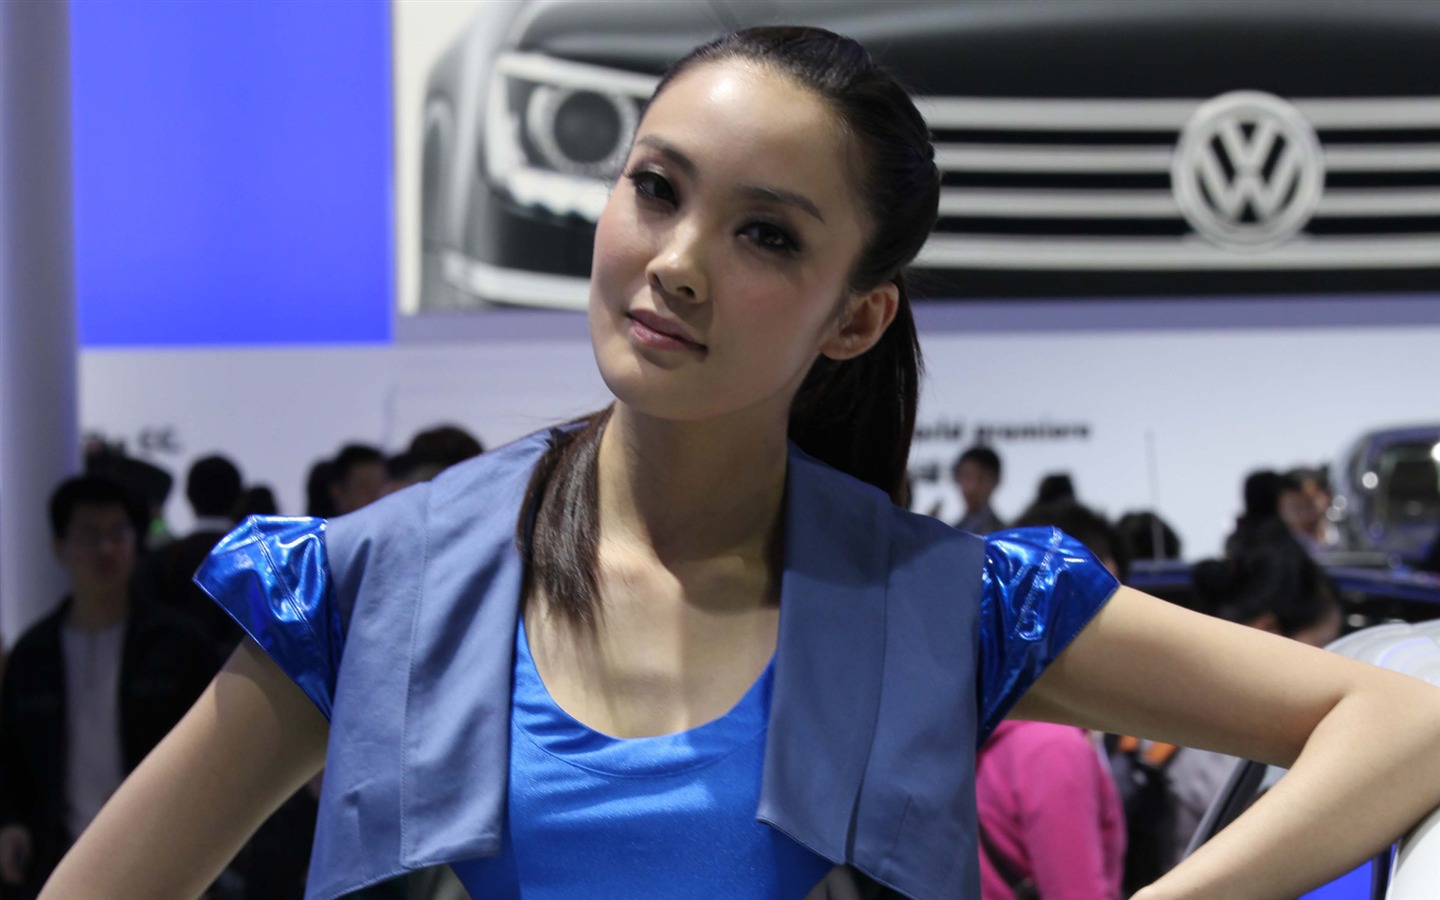 2010 Beijing International Auto Show beauty (2) (the wind chasing the clouds works) #7 - 1440x900